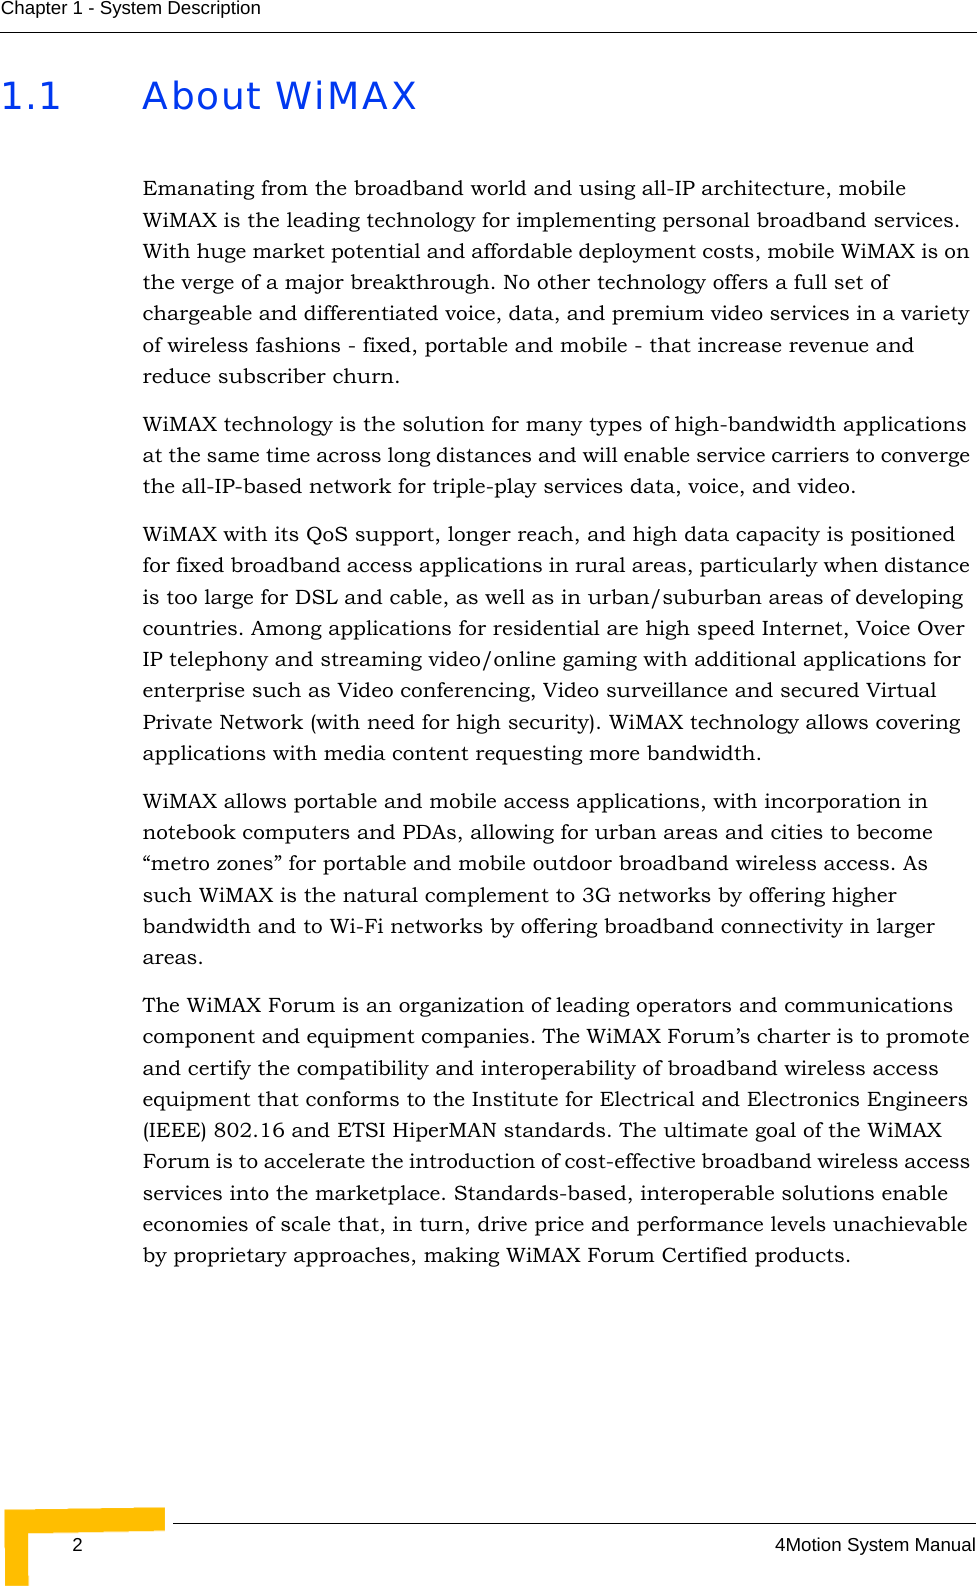 24Motion System ManualChapter 1 - System Description1.1 About WiMAXEmanating from the broadband world and using all-IP architecture, mobile WiMAX is the leading technology for implementing personal broadband services. With huge market potential and affordable deployment costs, mobile WiMAX is on the verge of a major breakthrough. No other technology offers a full set of chargeable and differentiated voice, data, and premium video services in a variety of wireless fashions - fixed, portable and mobile - that increase revenue and reduce subscriber churn.WiMAX technology is the solution for many types of high-bandwidth applications at the same time across long distances and will enable service carriers to converge the all-IP-based network for triple-play services data, voice, and video.WiMAX with its QoS support, longer reach, and high data capacity is positioned for fixed broadband access applications in rural areas, particularly when distance is too large for DSL and cable, as well as in urban/suburban areas of developing countries. Among applications for residential are high speed Internet, Voice Over IP telephony and streaming video/online gaming with additional applications for enterprise such as Video conferencing, Video surveillance and secured Virtual Private Network (with need for high security). WiMAX technology allows covering applications with media content requesting more bandwidth.WiMAX allows portable and mobile access applications, with incorporation in notebook computers and PDAs, allowing for urban areas and cities to become “metro zones” for portable and mobile outdoor broadband wireless access. As such WiMAX is the natural complement to 3G networks by offering higher bandwidth and to Wi-Fi networks by offering broadband connectivity in larger areas.The WiMAX Forum is an organization of leading operators and communications component and equipment companies. The WiMAX Forum’s charter is to promote and certify the compatibility and interoperability of broadband wireless access equipment that conforms to the Institute for Electrical and Electronics Engineers (IEEE) 802.16 and ETSI HiperMAN standards. The ultimate goal of the WiMAX Forum is to accelerate the introduction of cost-effective broadband wireless access services into the marketplace. Standards-based, interoperable solutions enable economies of scale that, in turn, drive price and performance levels unachievable by proprietary approaches, making WiMAX Forum Certified products.